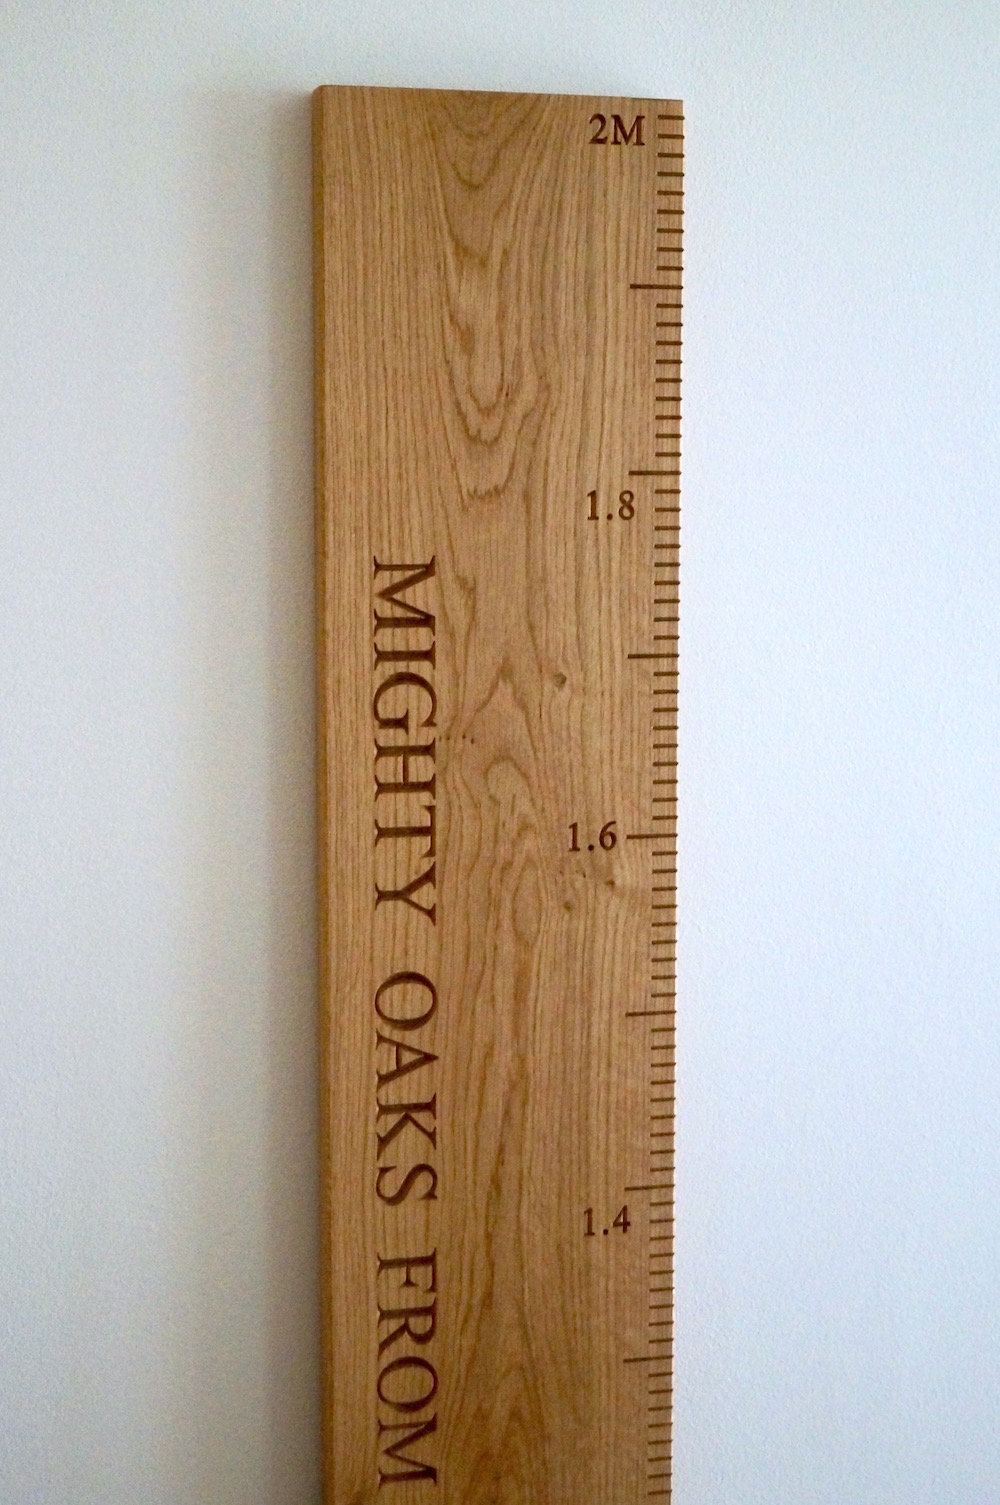 bespoke-wooden-height-charts-makemesomethingspecial.com